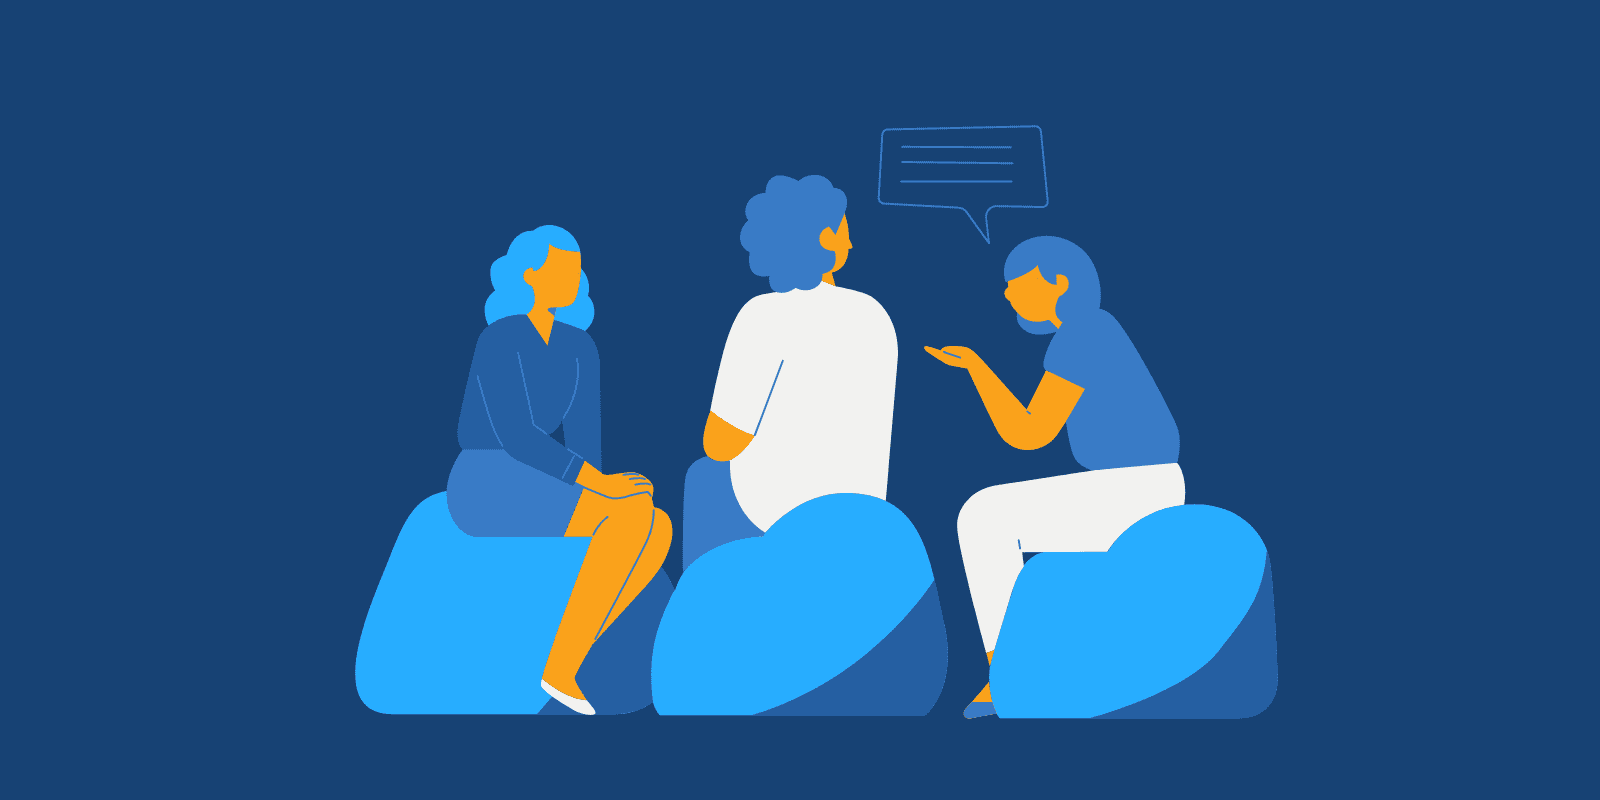 Illustration of people with long hair sitting on comfy cushions talking to each other